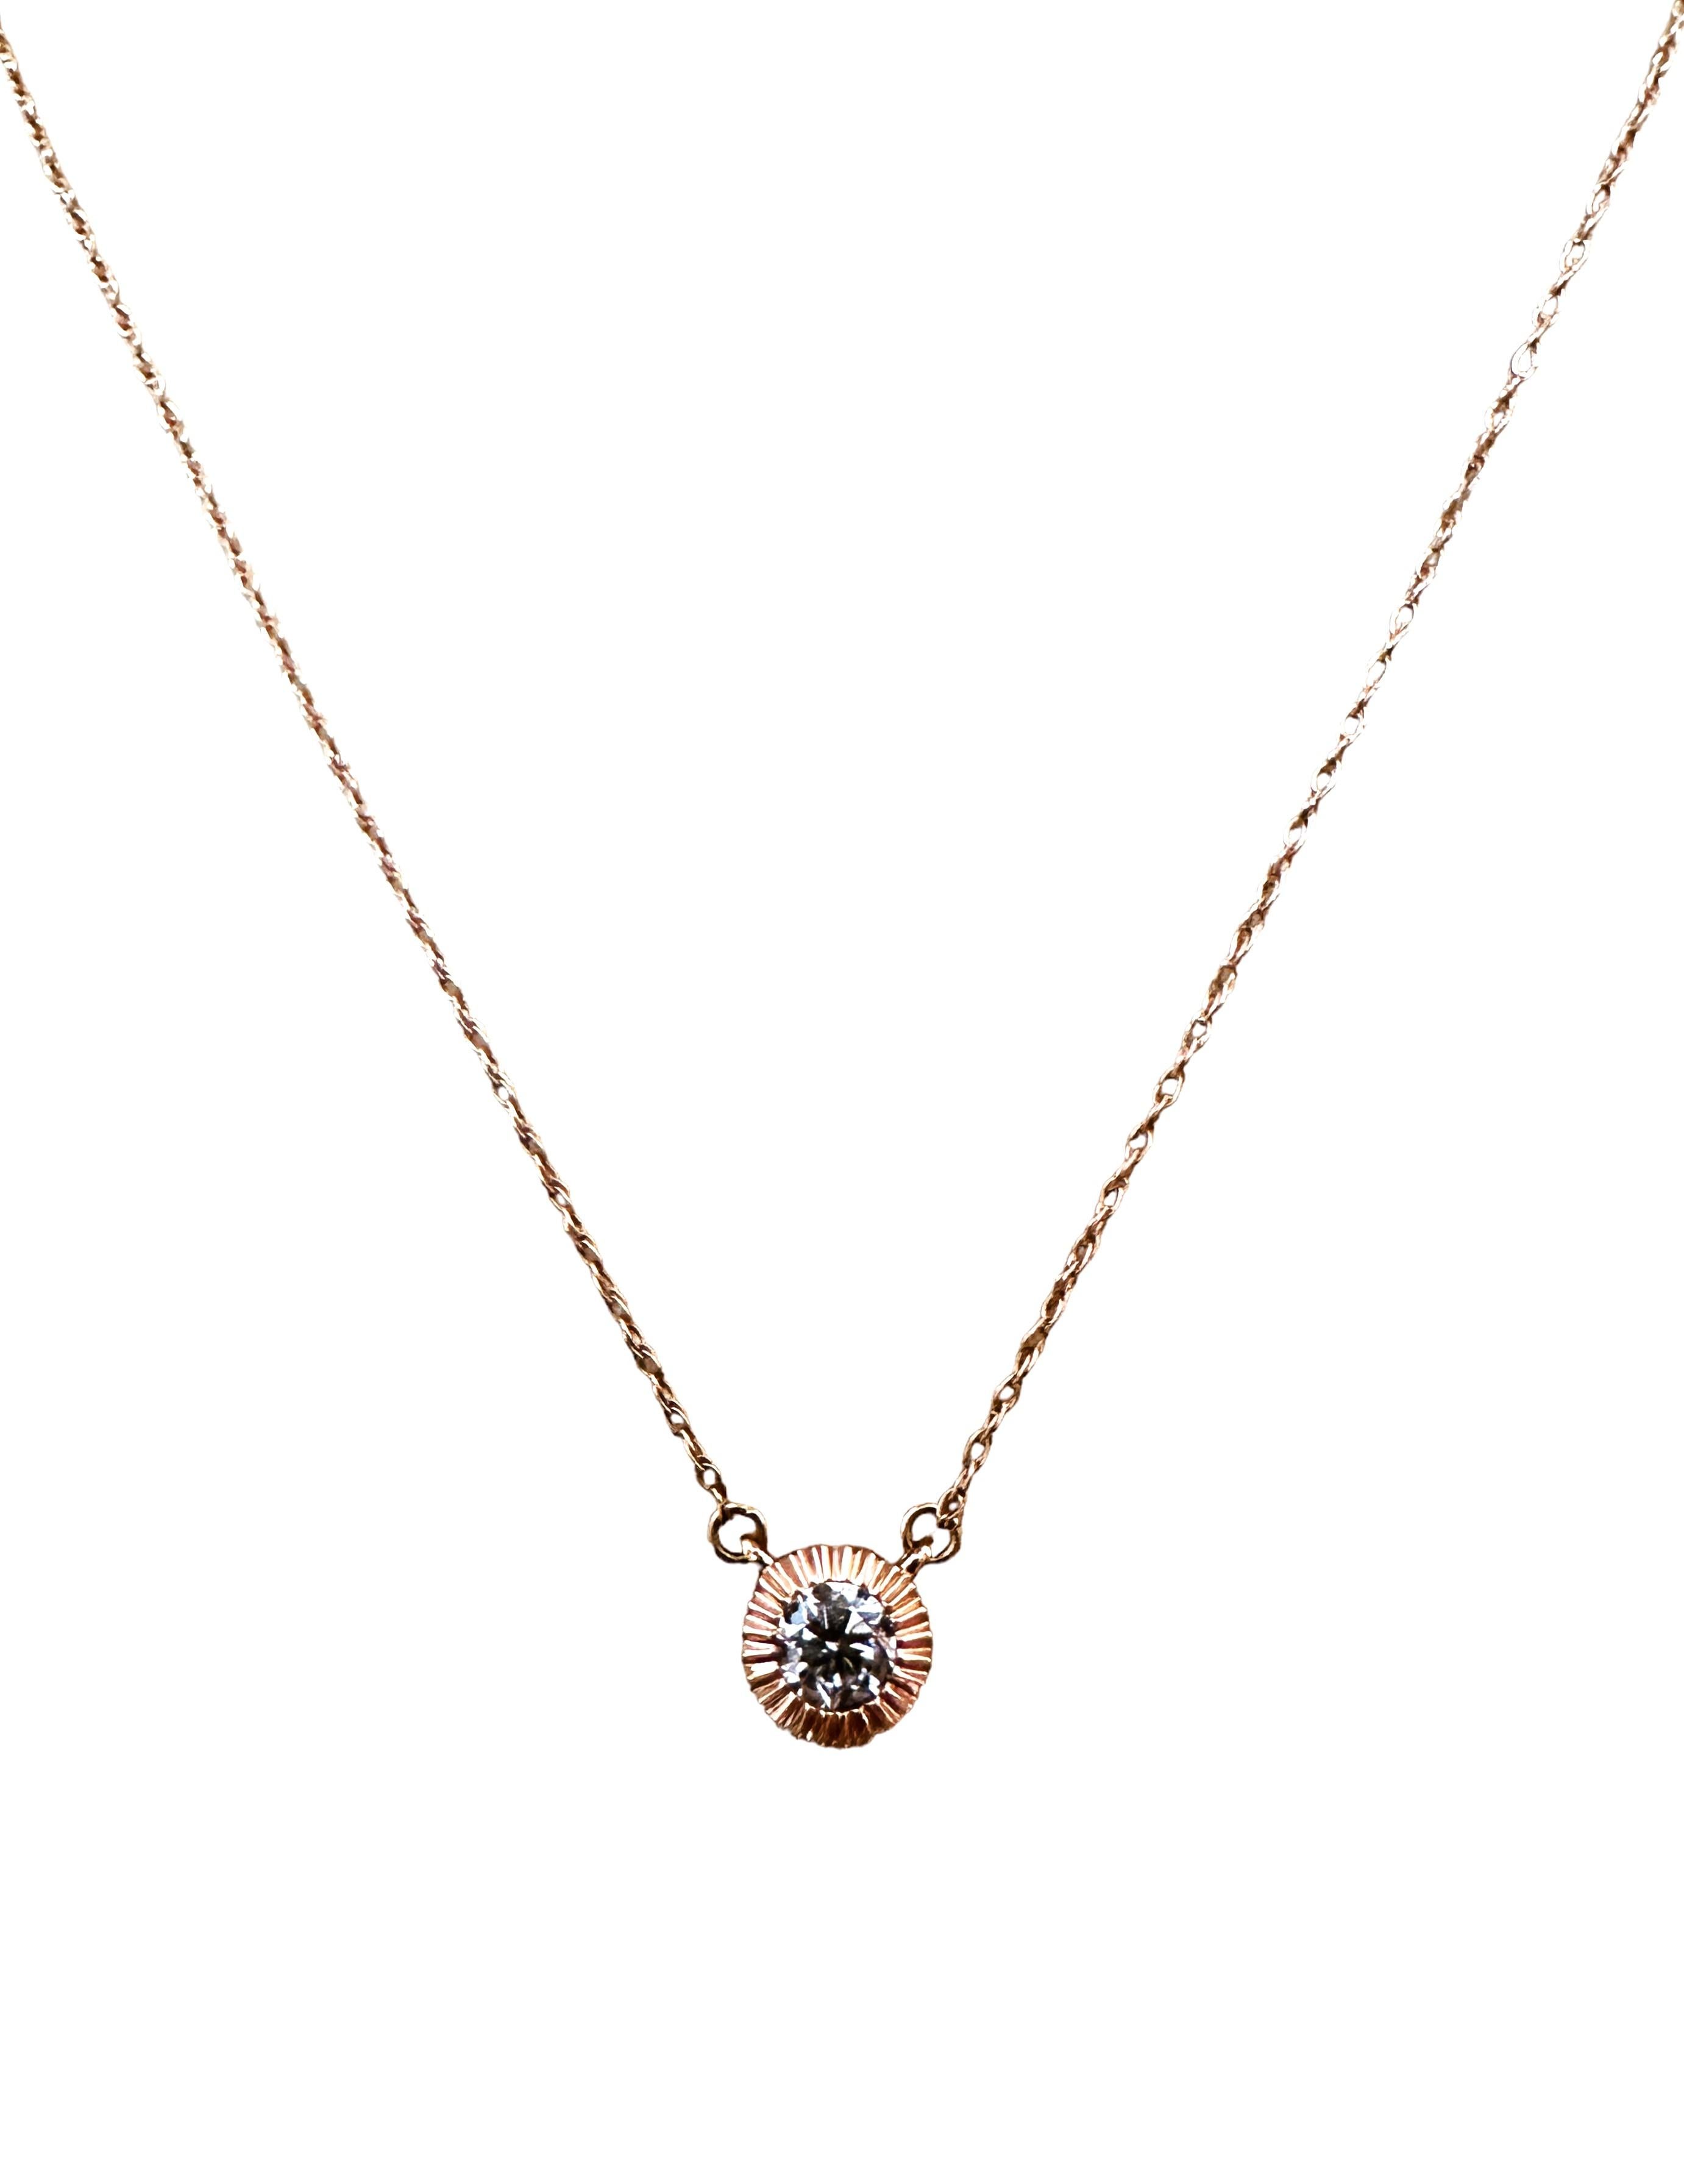 New 14k Rose Gold Diamond Pendant Necklace With Matching Earrings For Sale 1